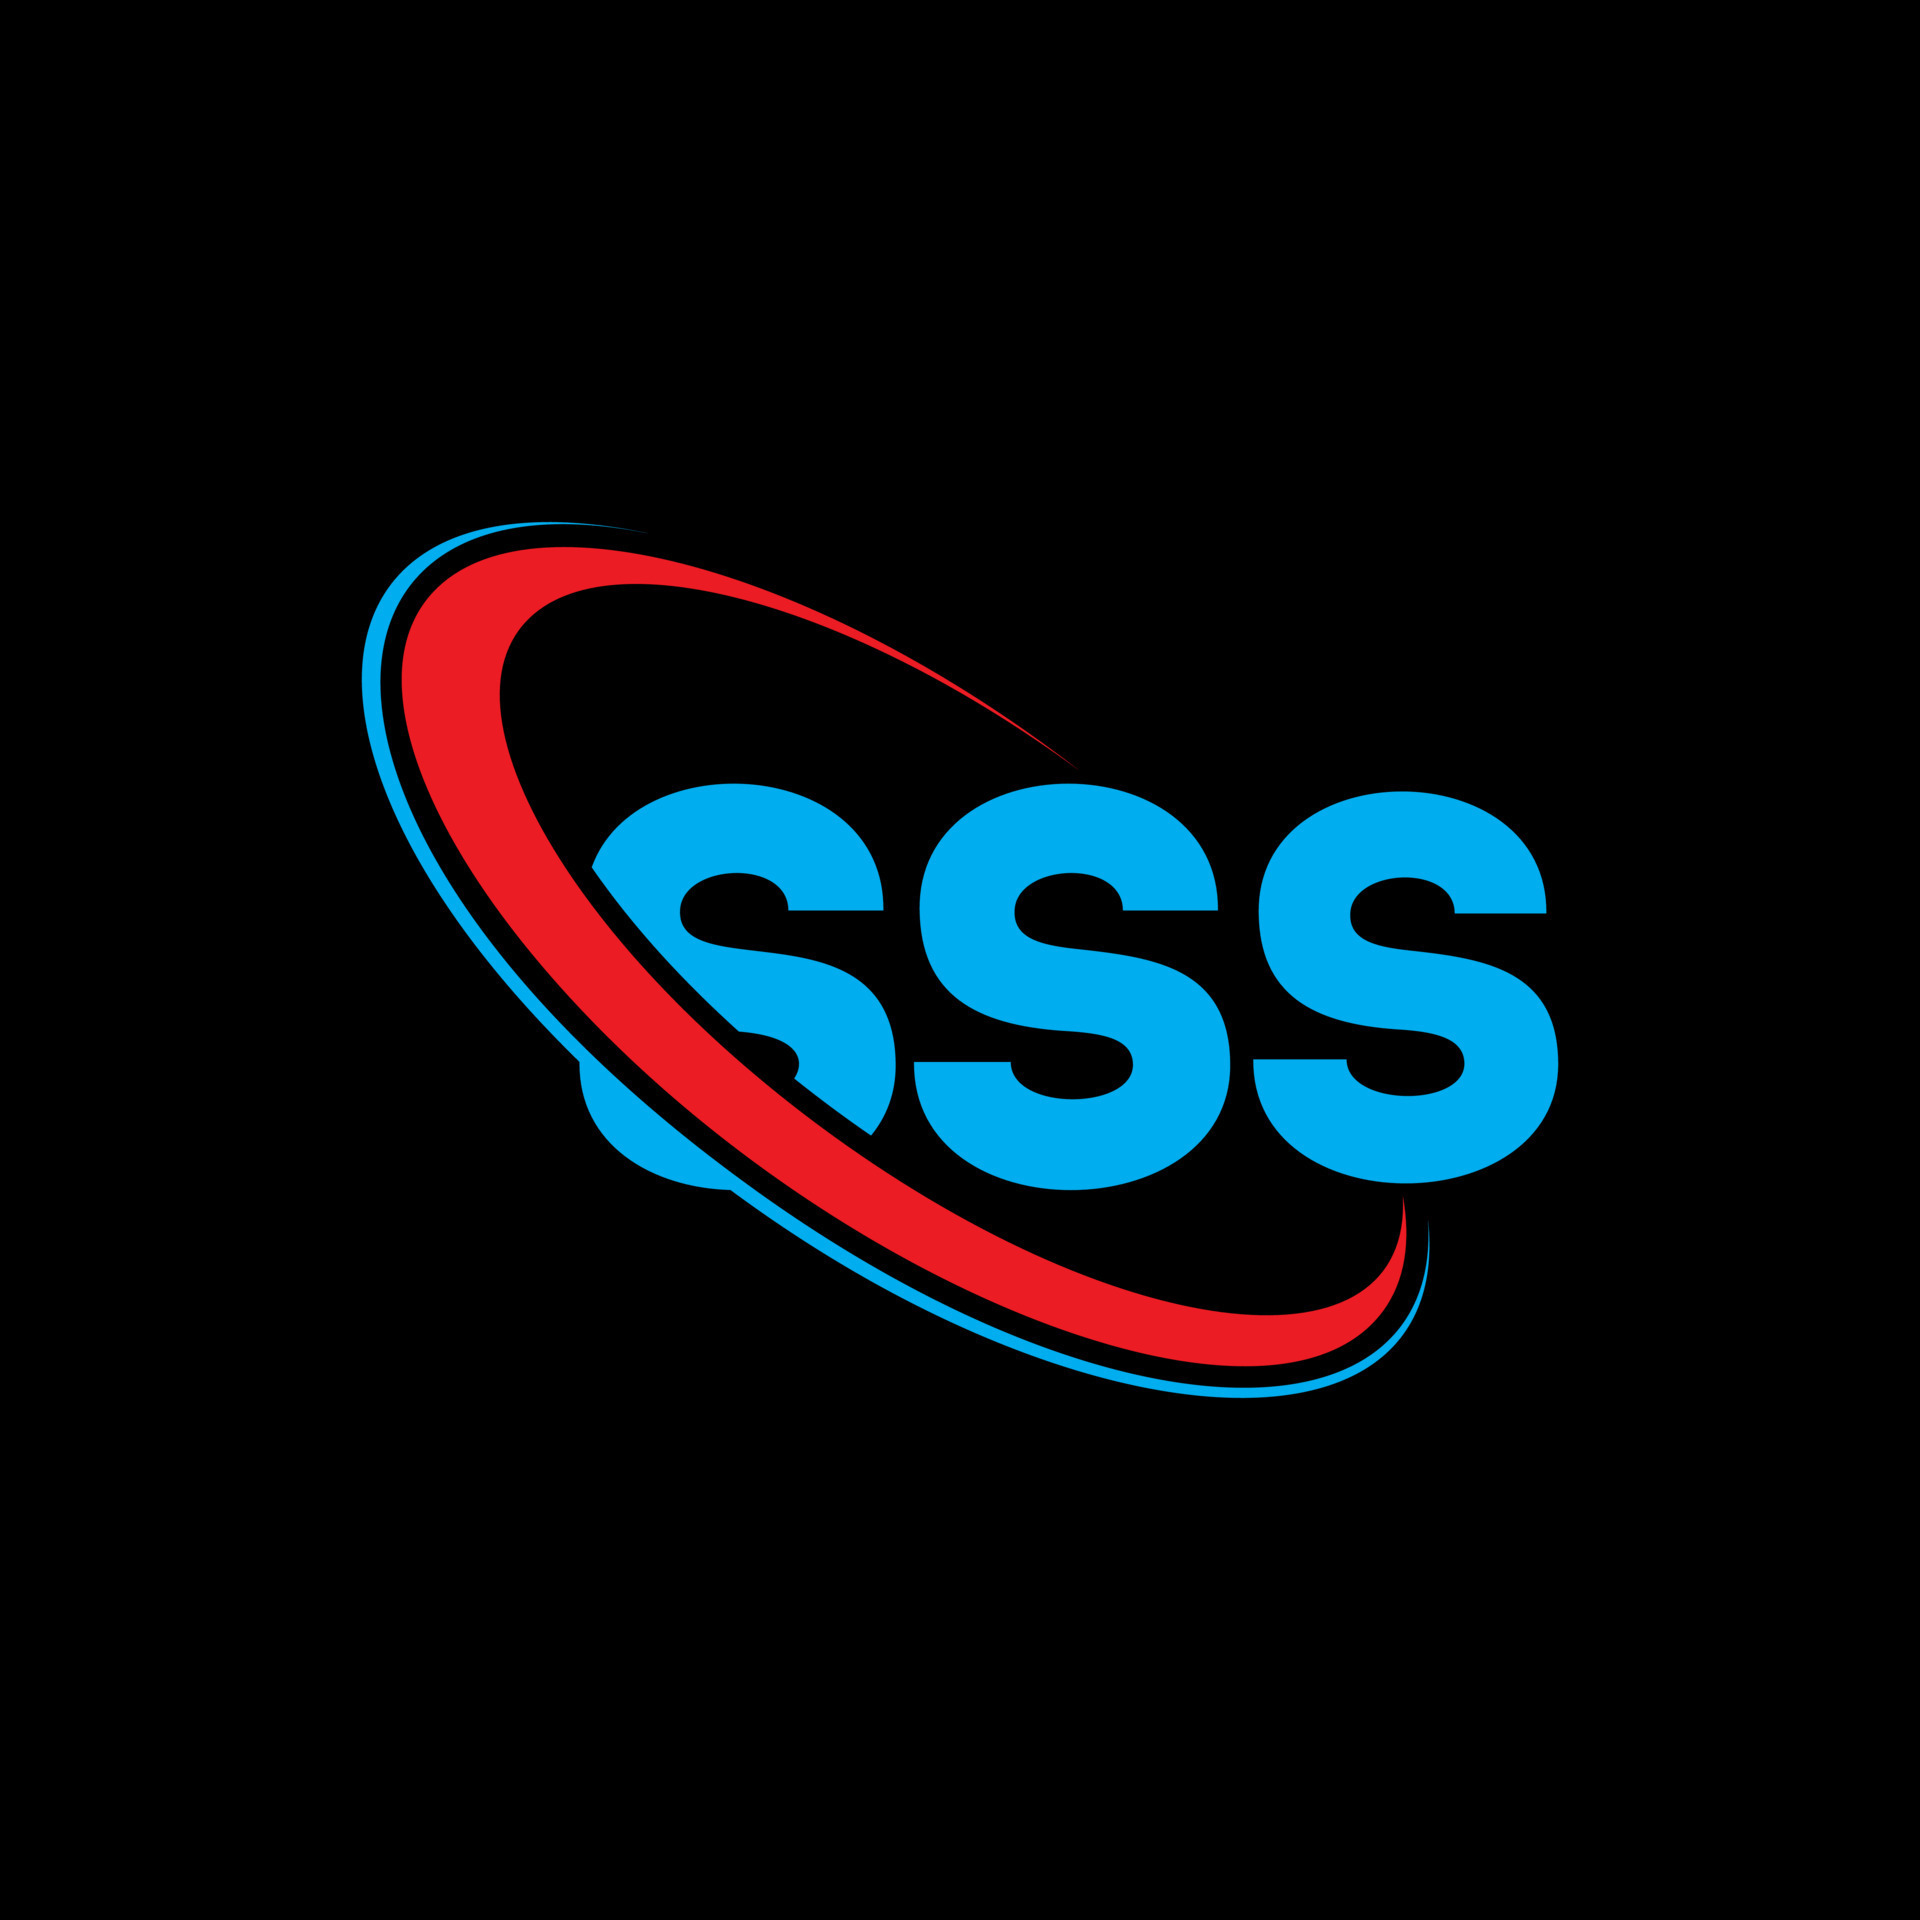 SSS Logo | Almost Anything Web and Graphic Design | Flickr